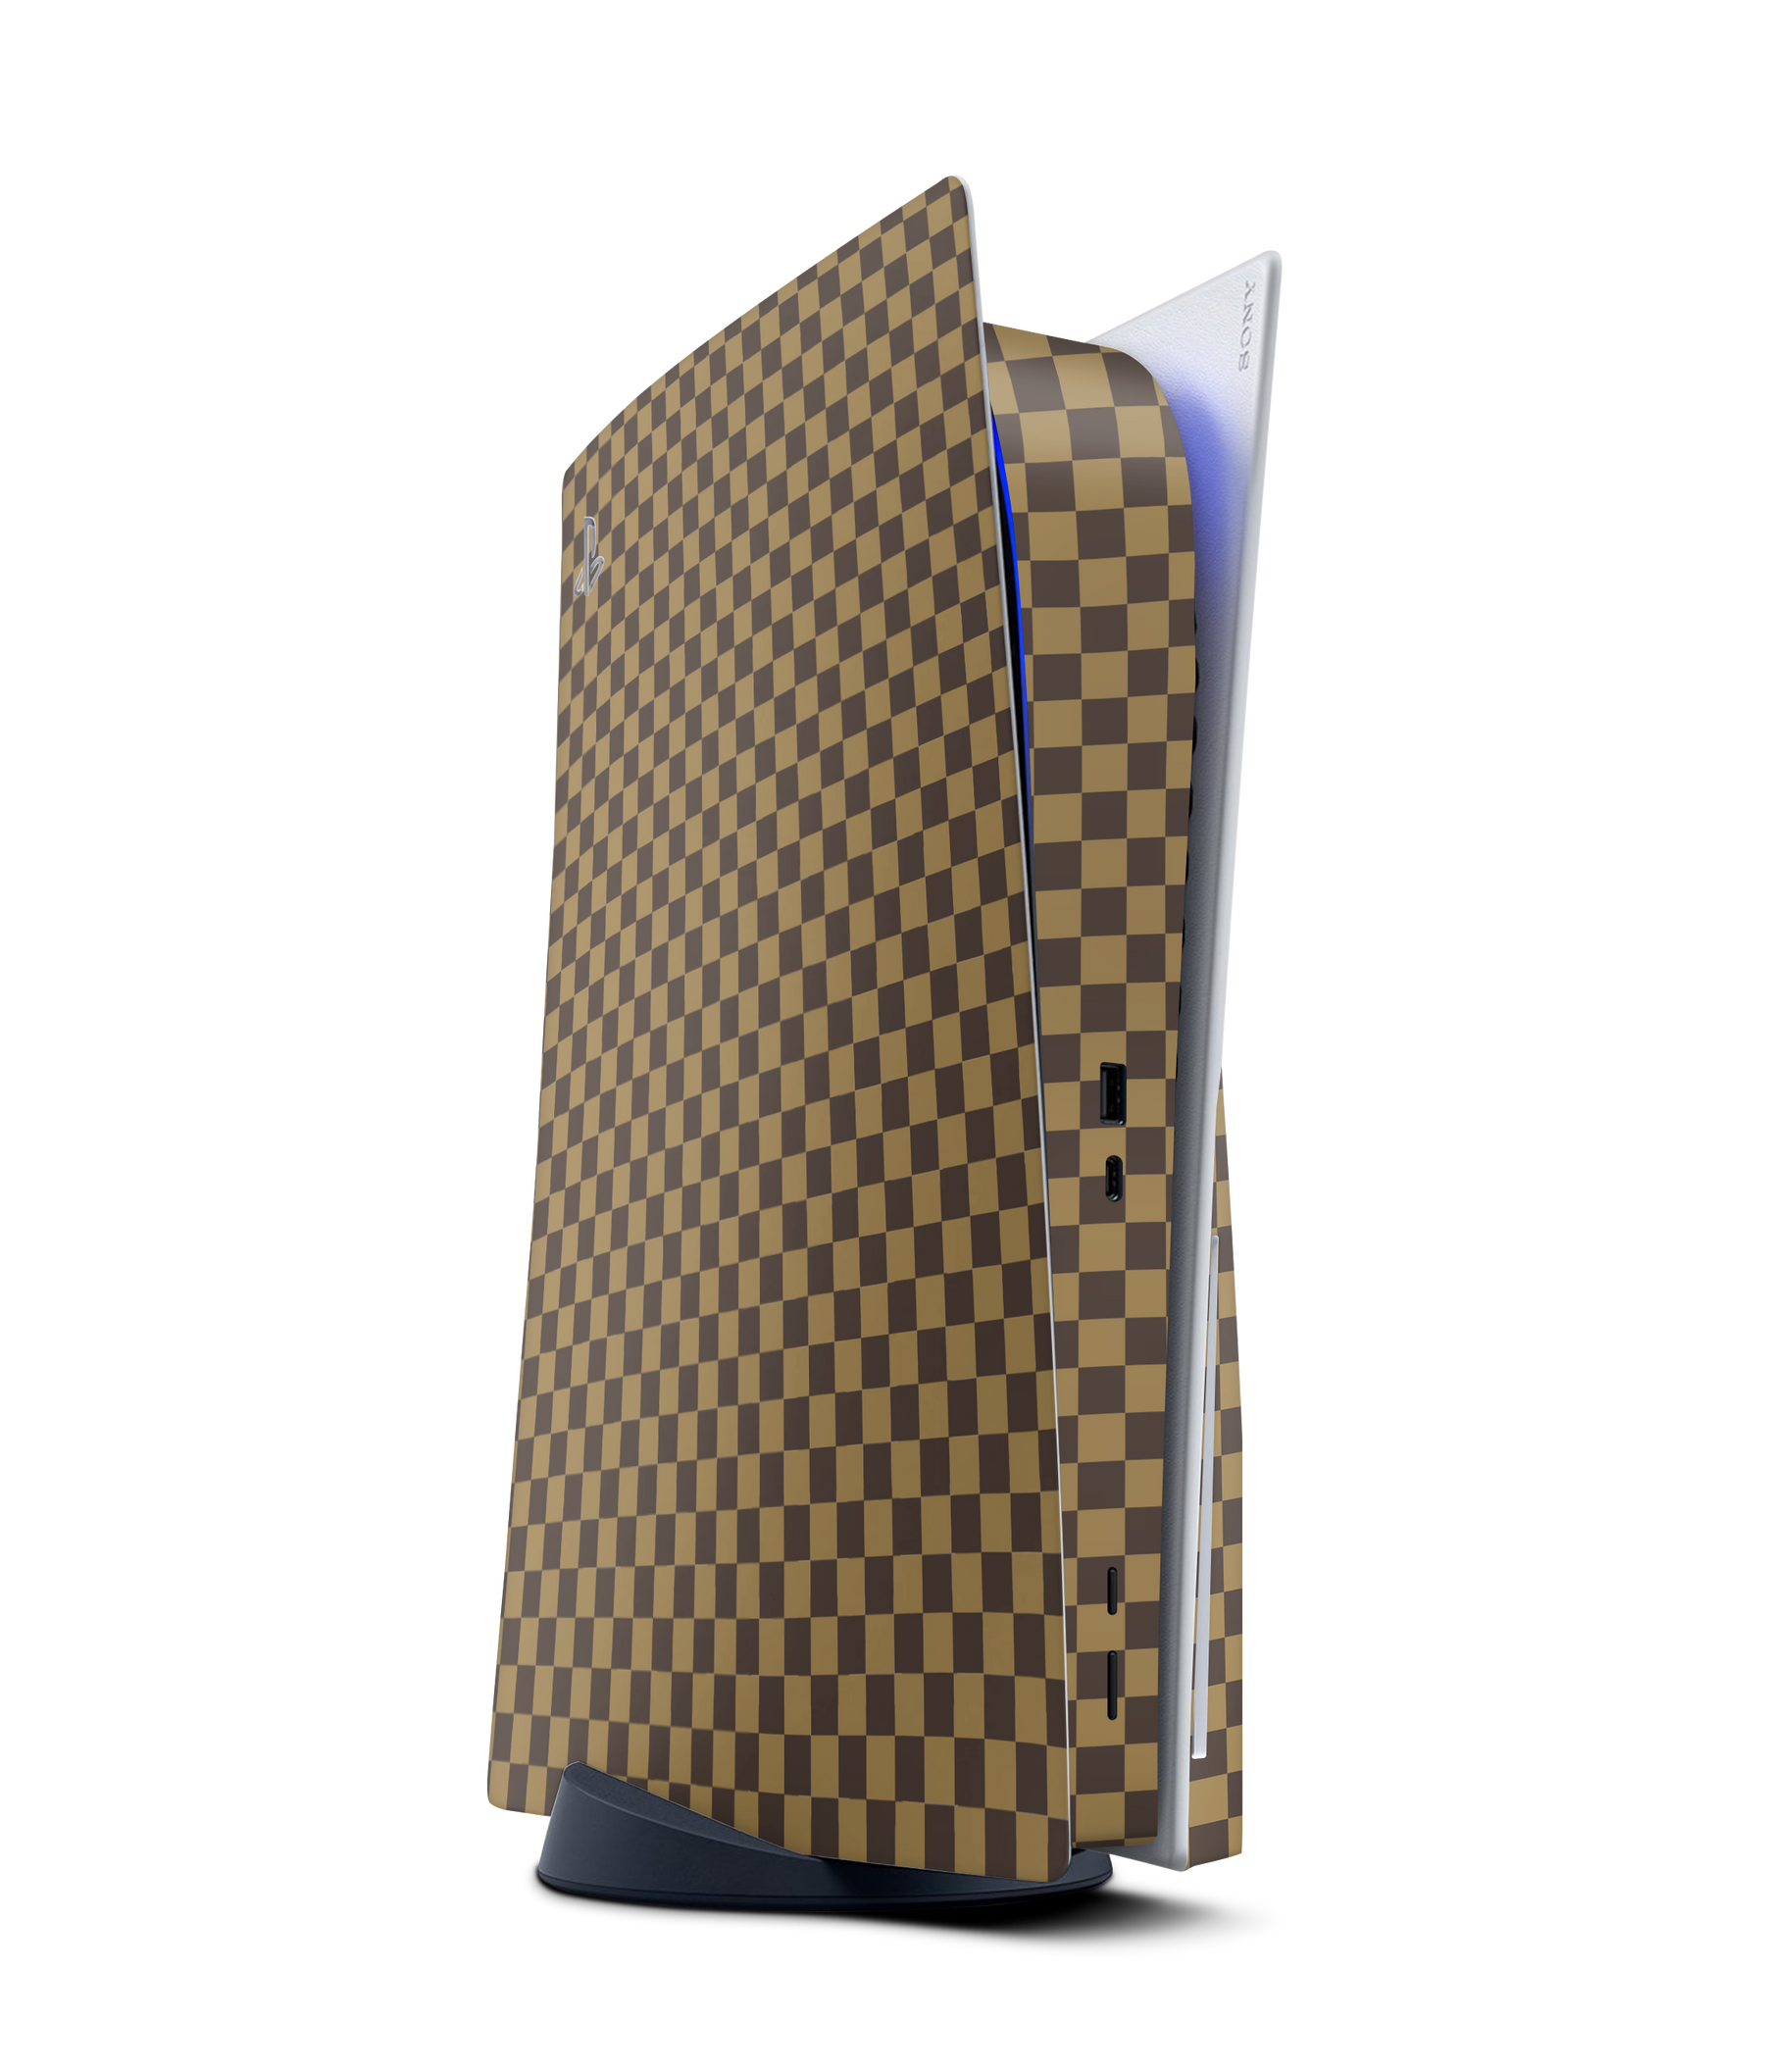 PlayStation 5 Disc Checkers brown